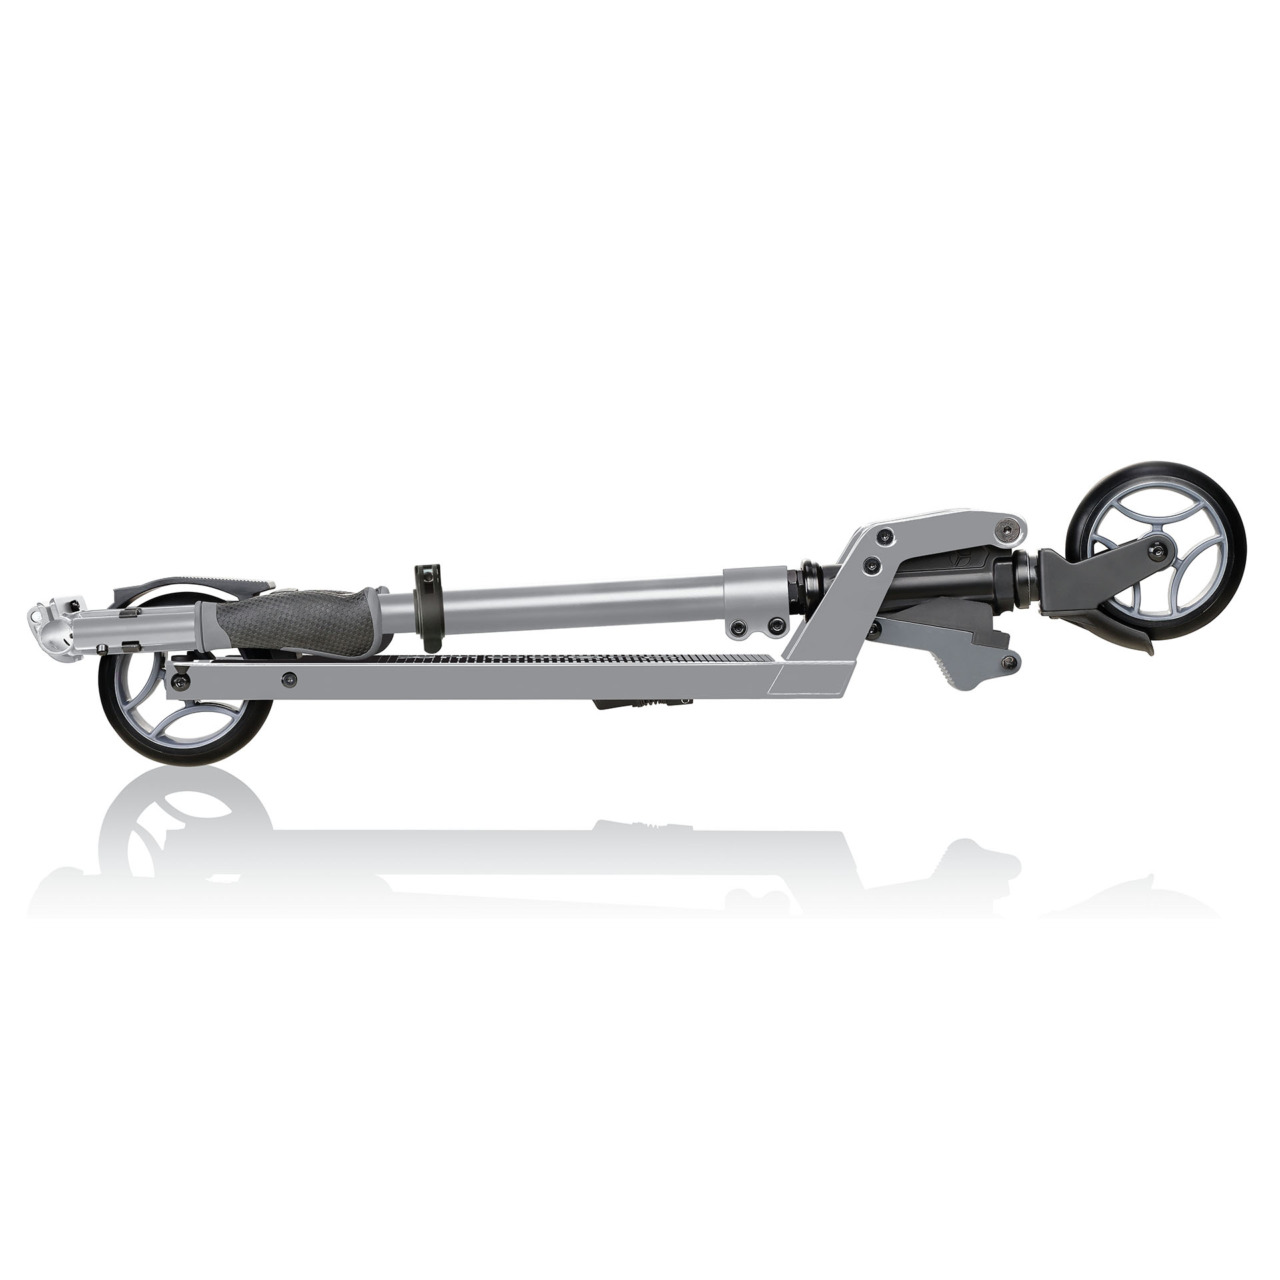 670 130 2 Fold Up Scooter